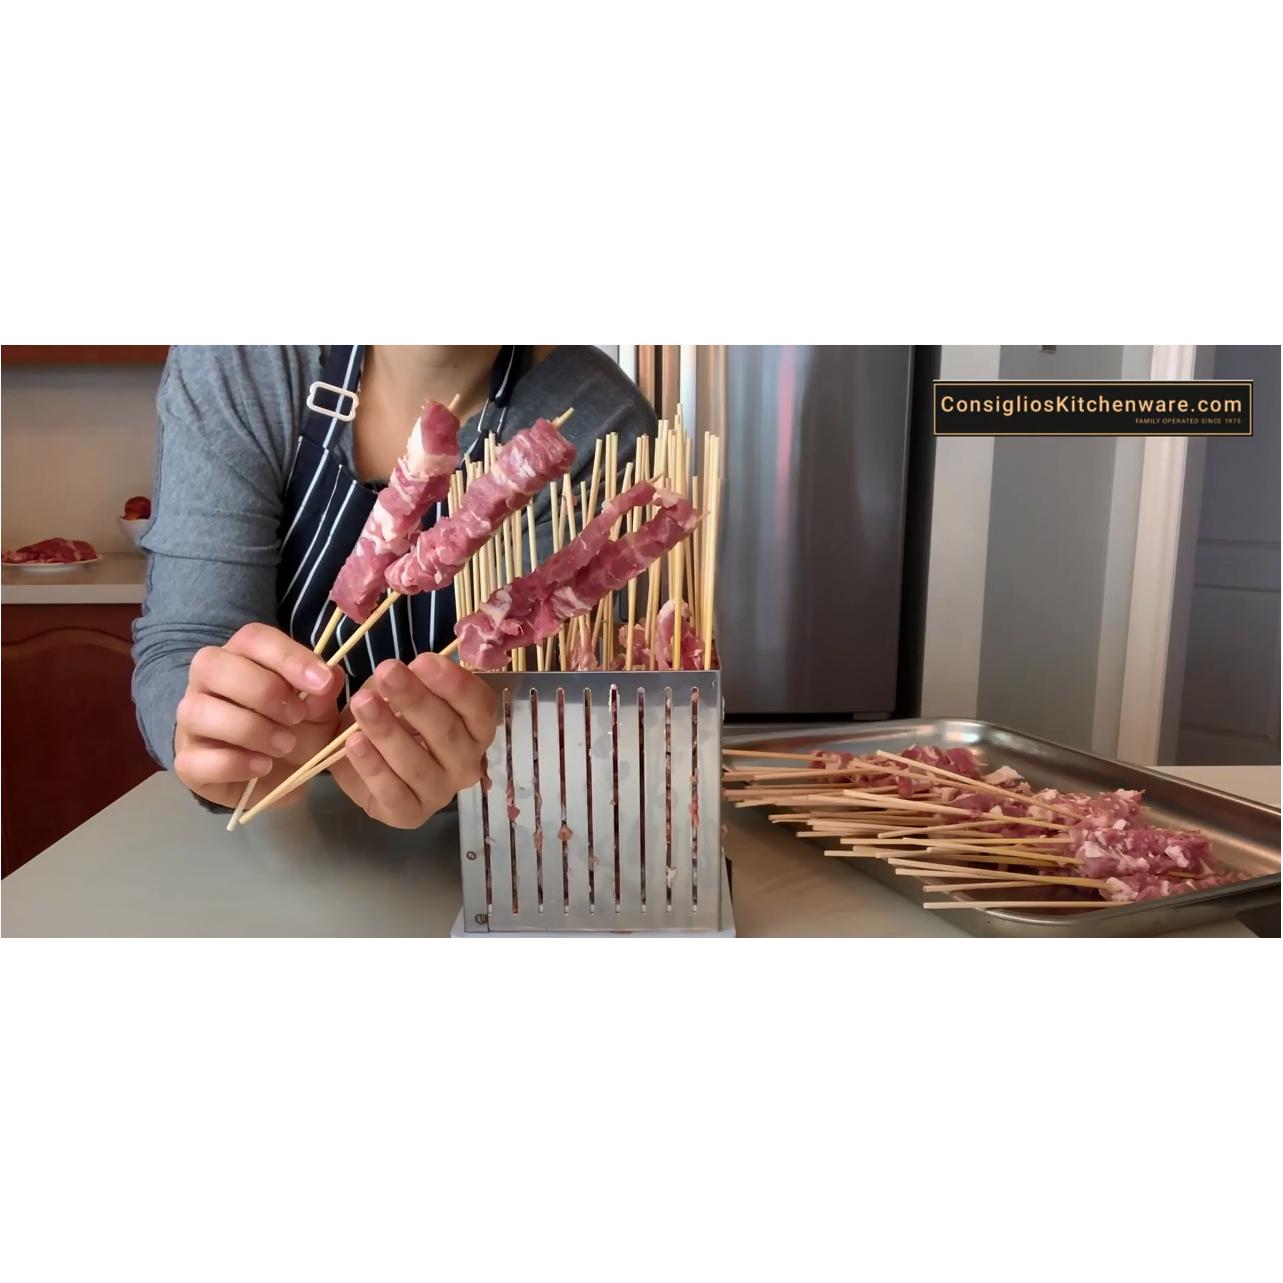 Cubo Complete Arrosticini Maker Kit with Knife & Skewers - Makes 100 Authentic Italian Lamb Skewers called Arrosticini - Made in Italy